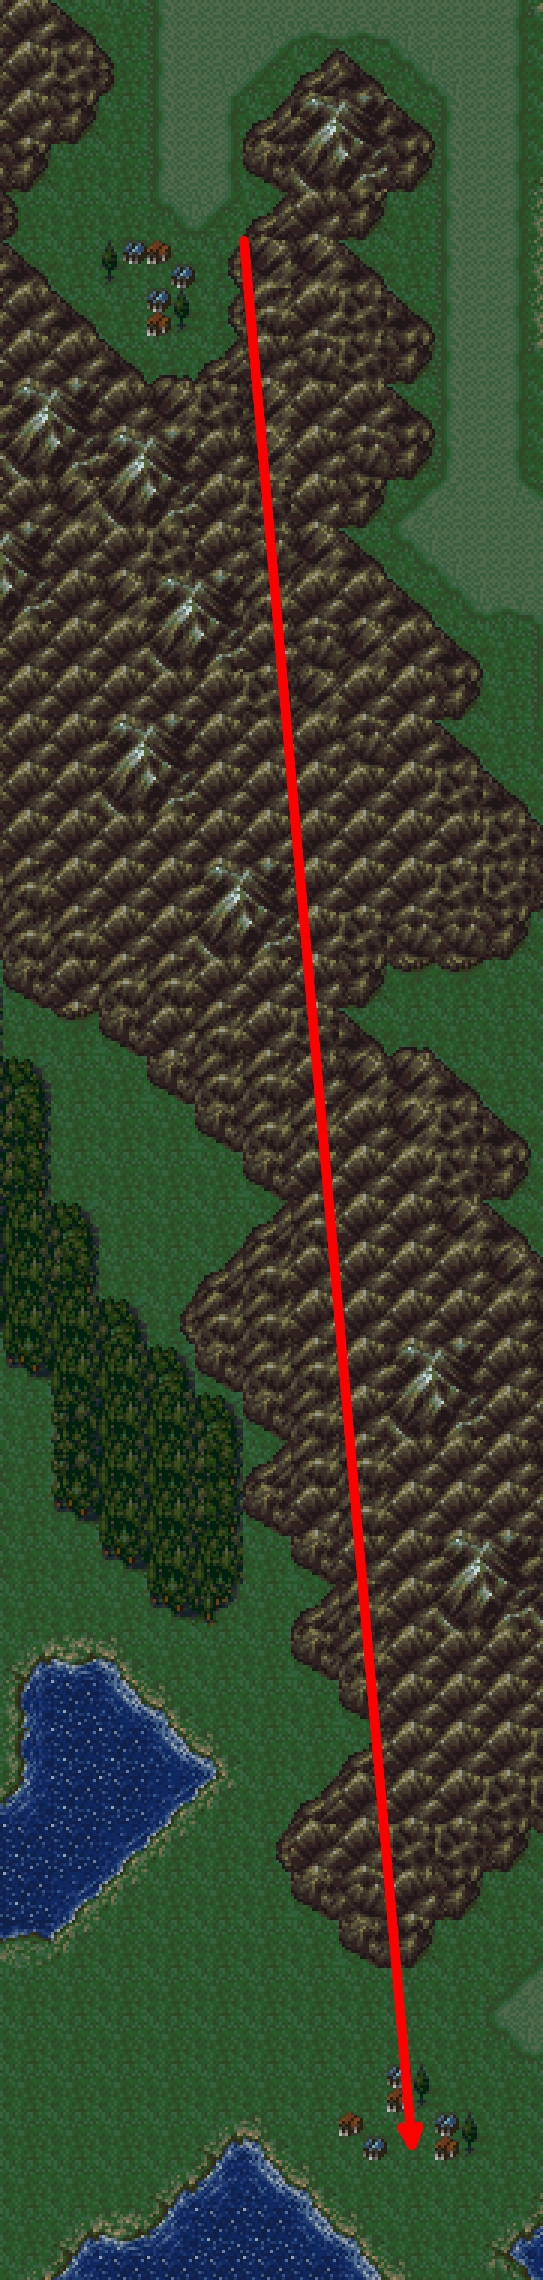 image showing route to Jidoor on world map